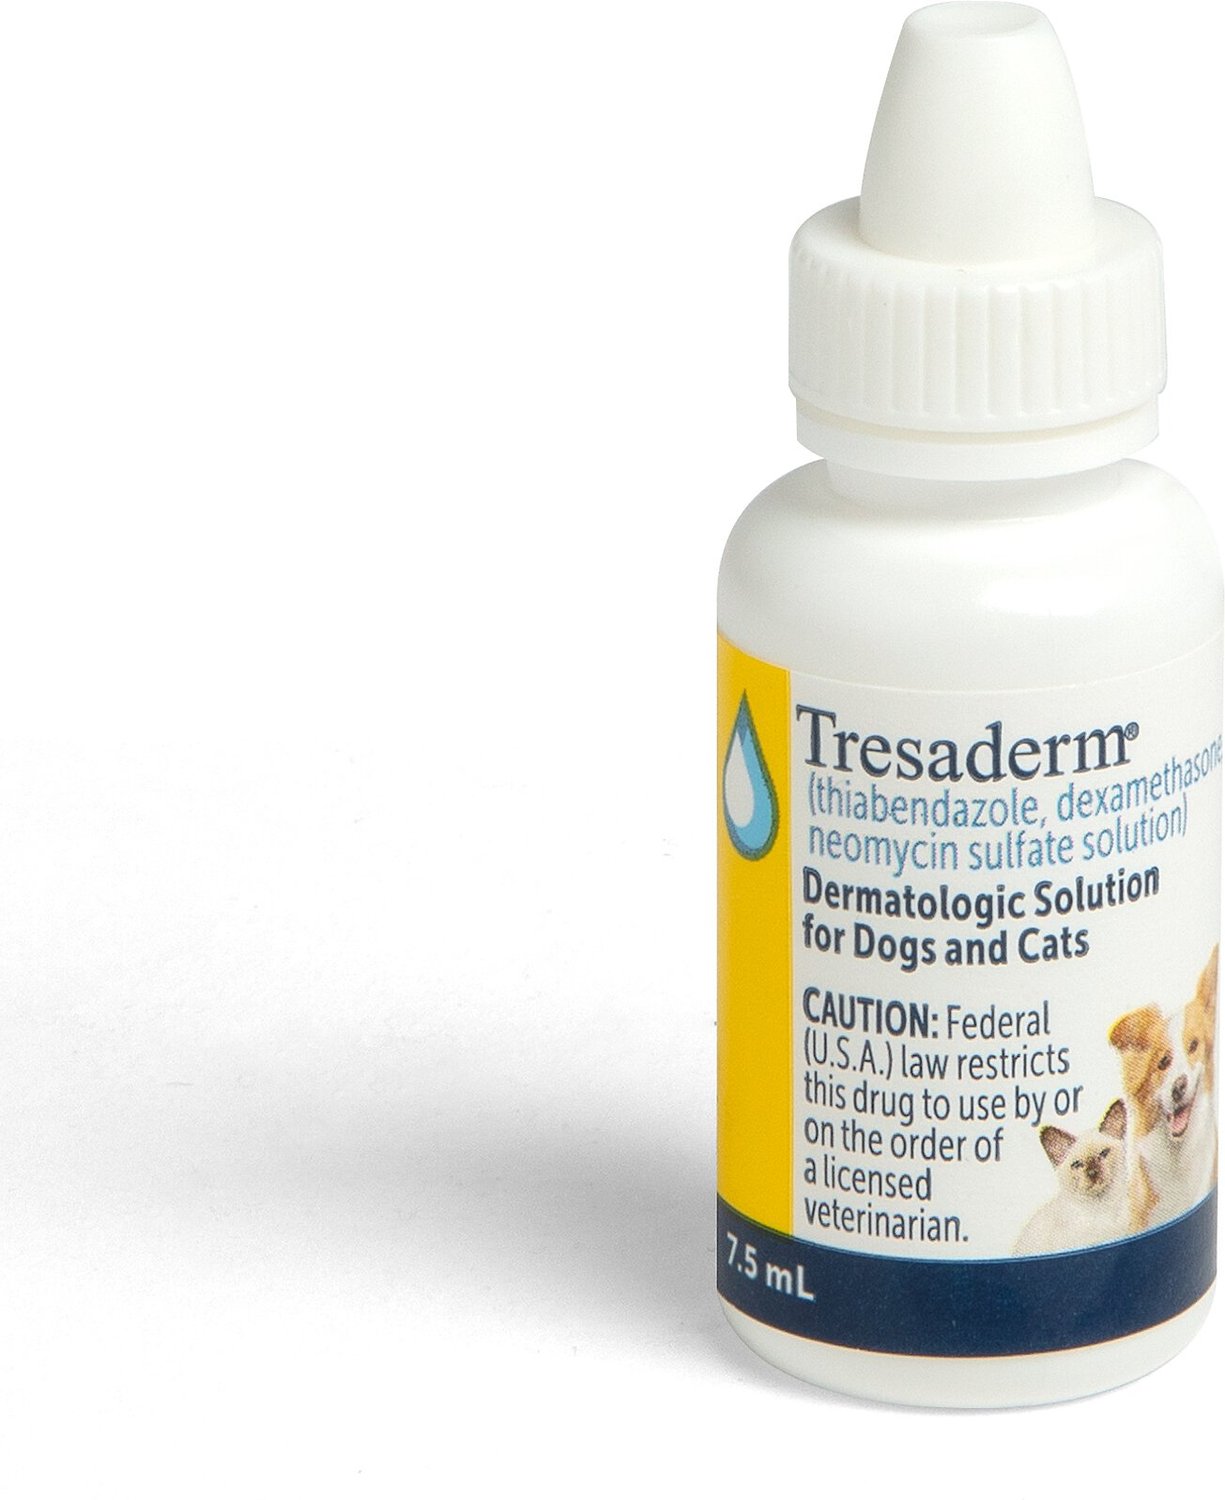 Tresaderm Topical Solution for Dogs & Cats, 7.5mL